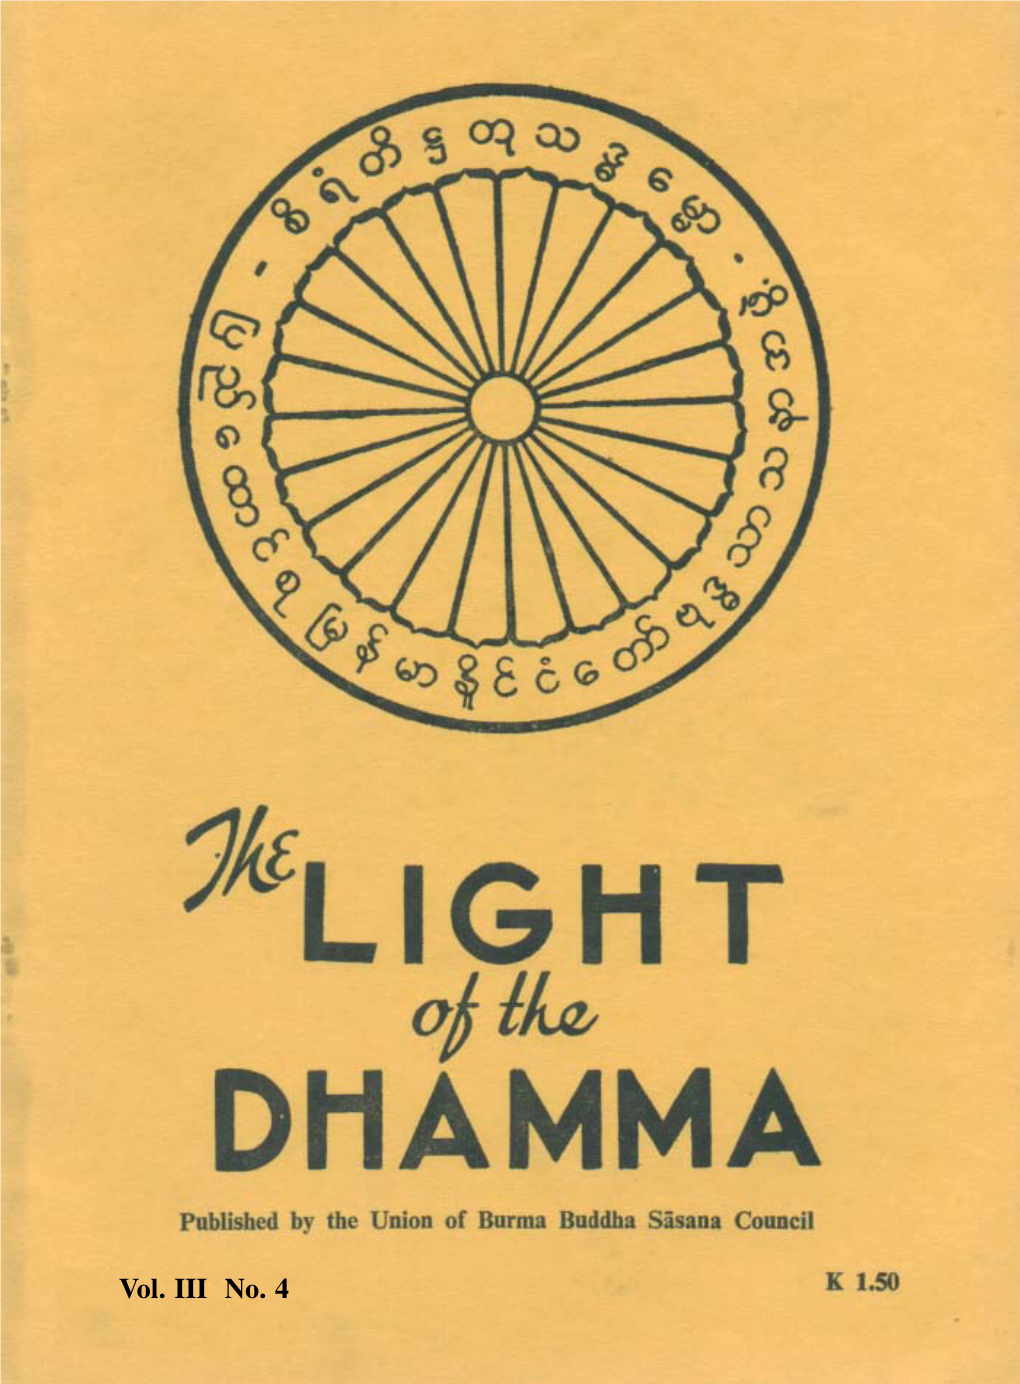 The Light of the Dhamma Vol III No 4, August, 1956